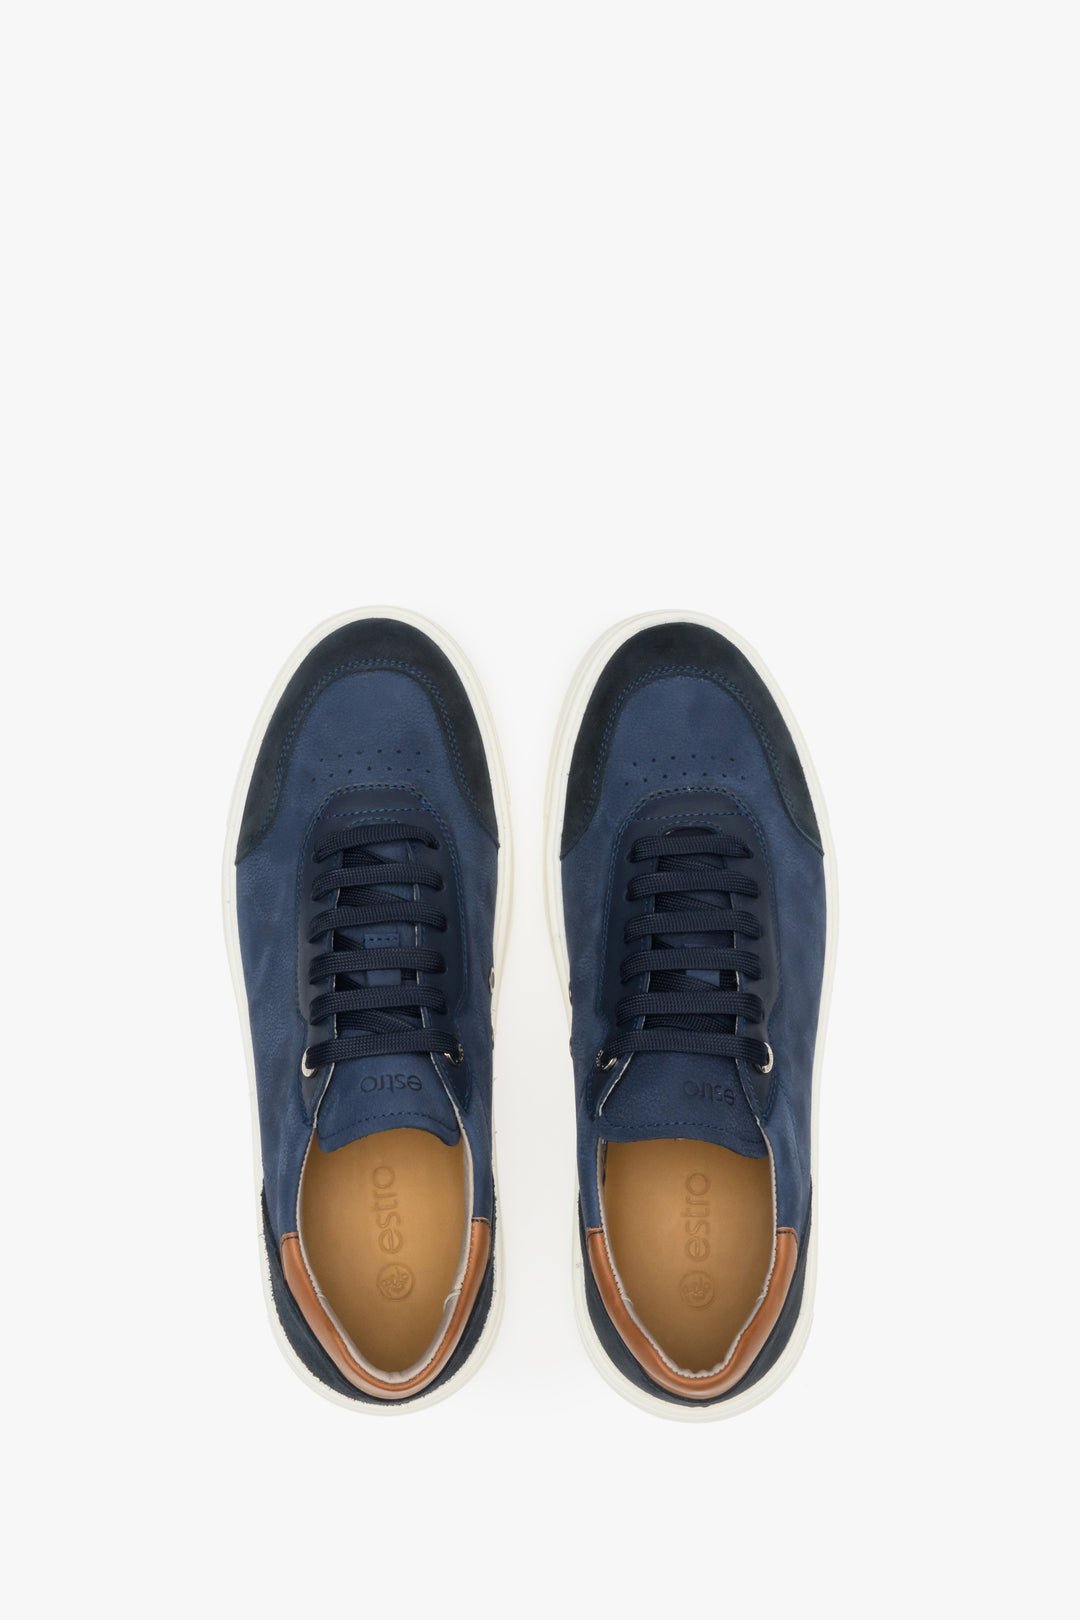 Blue, brown and white Estro men's nubuck and natural leather sneakers - shoe presentation from above.